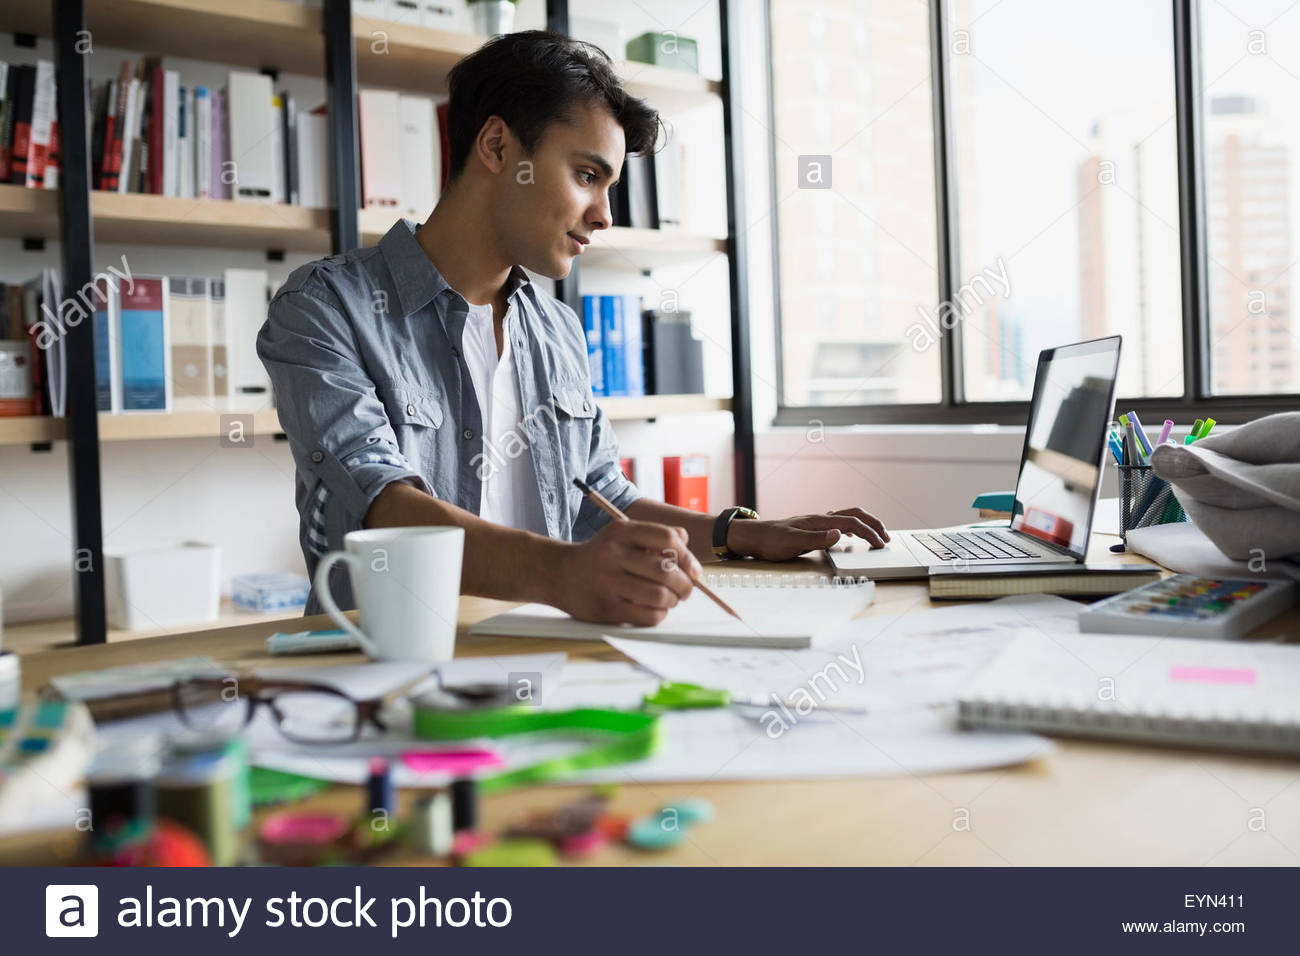 Architect working at laptop in office Stock Photo